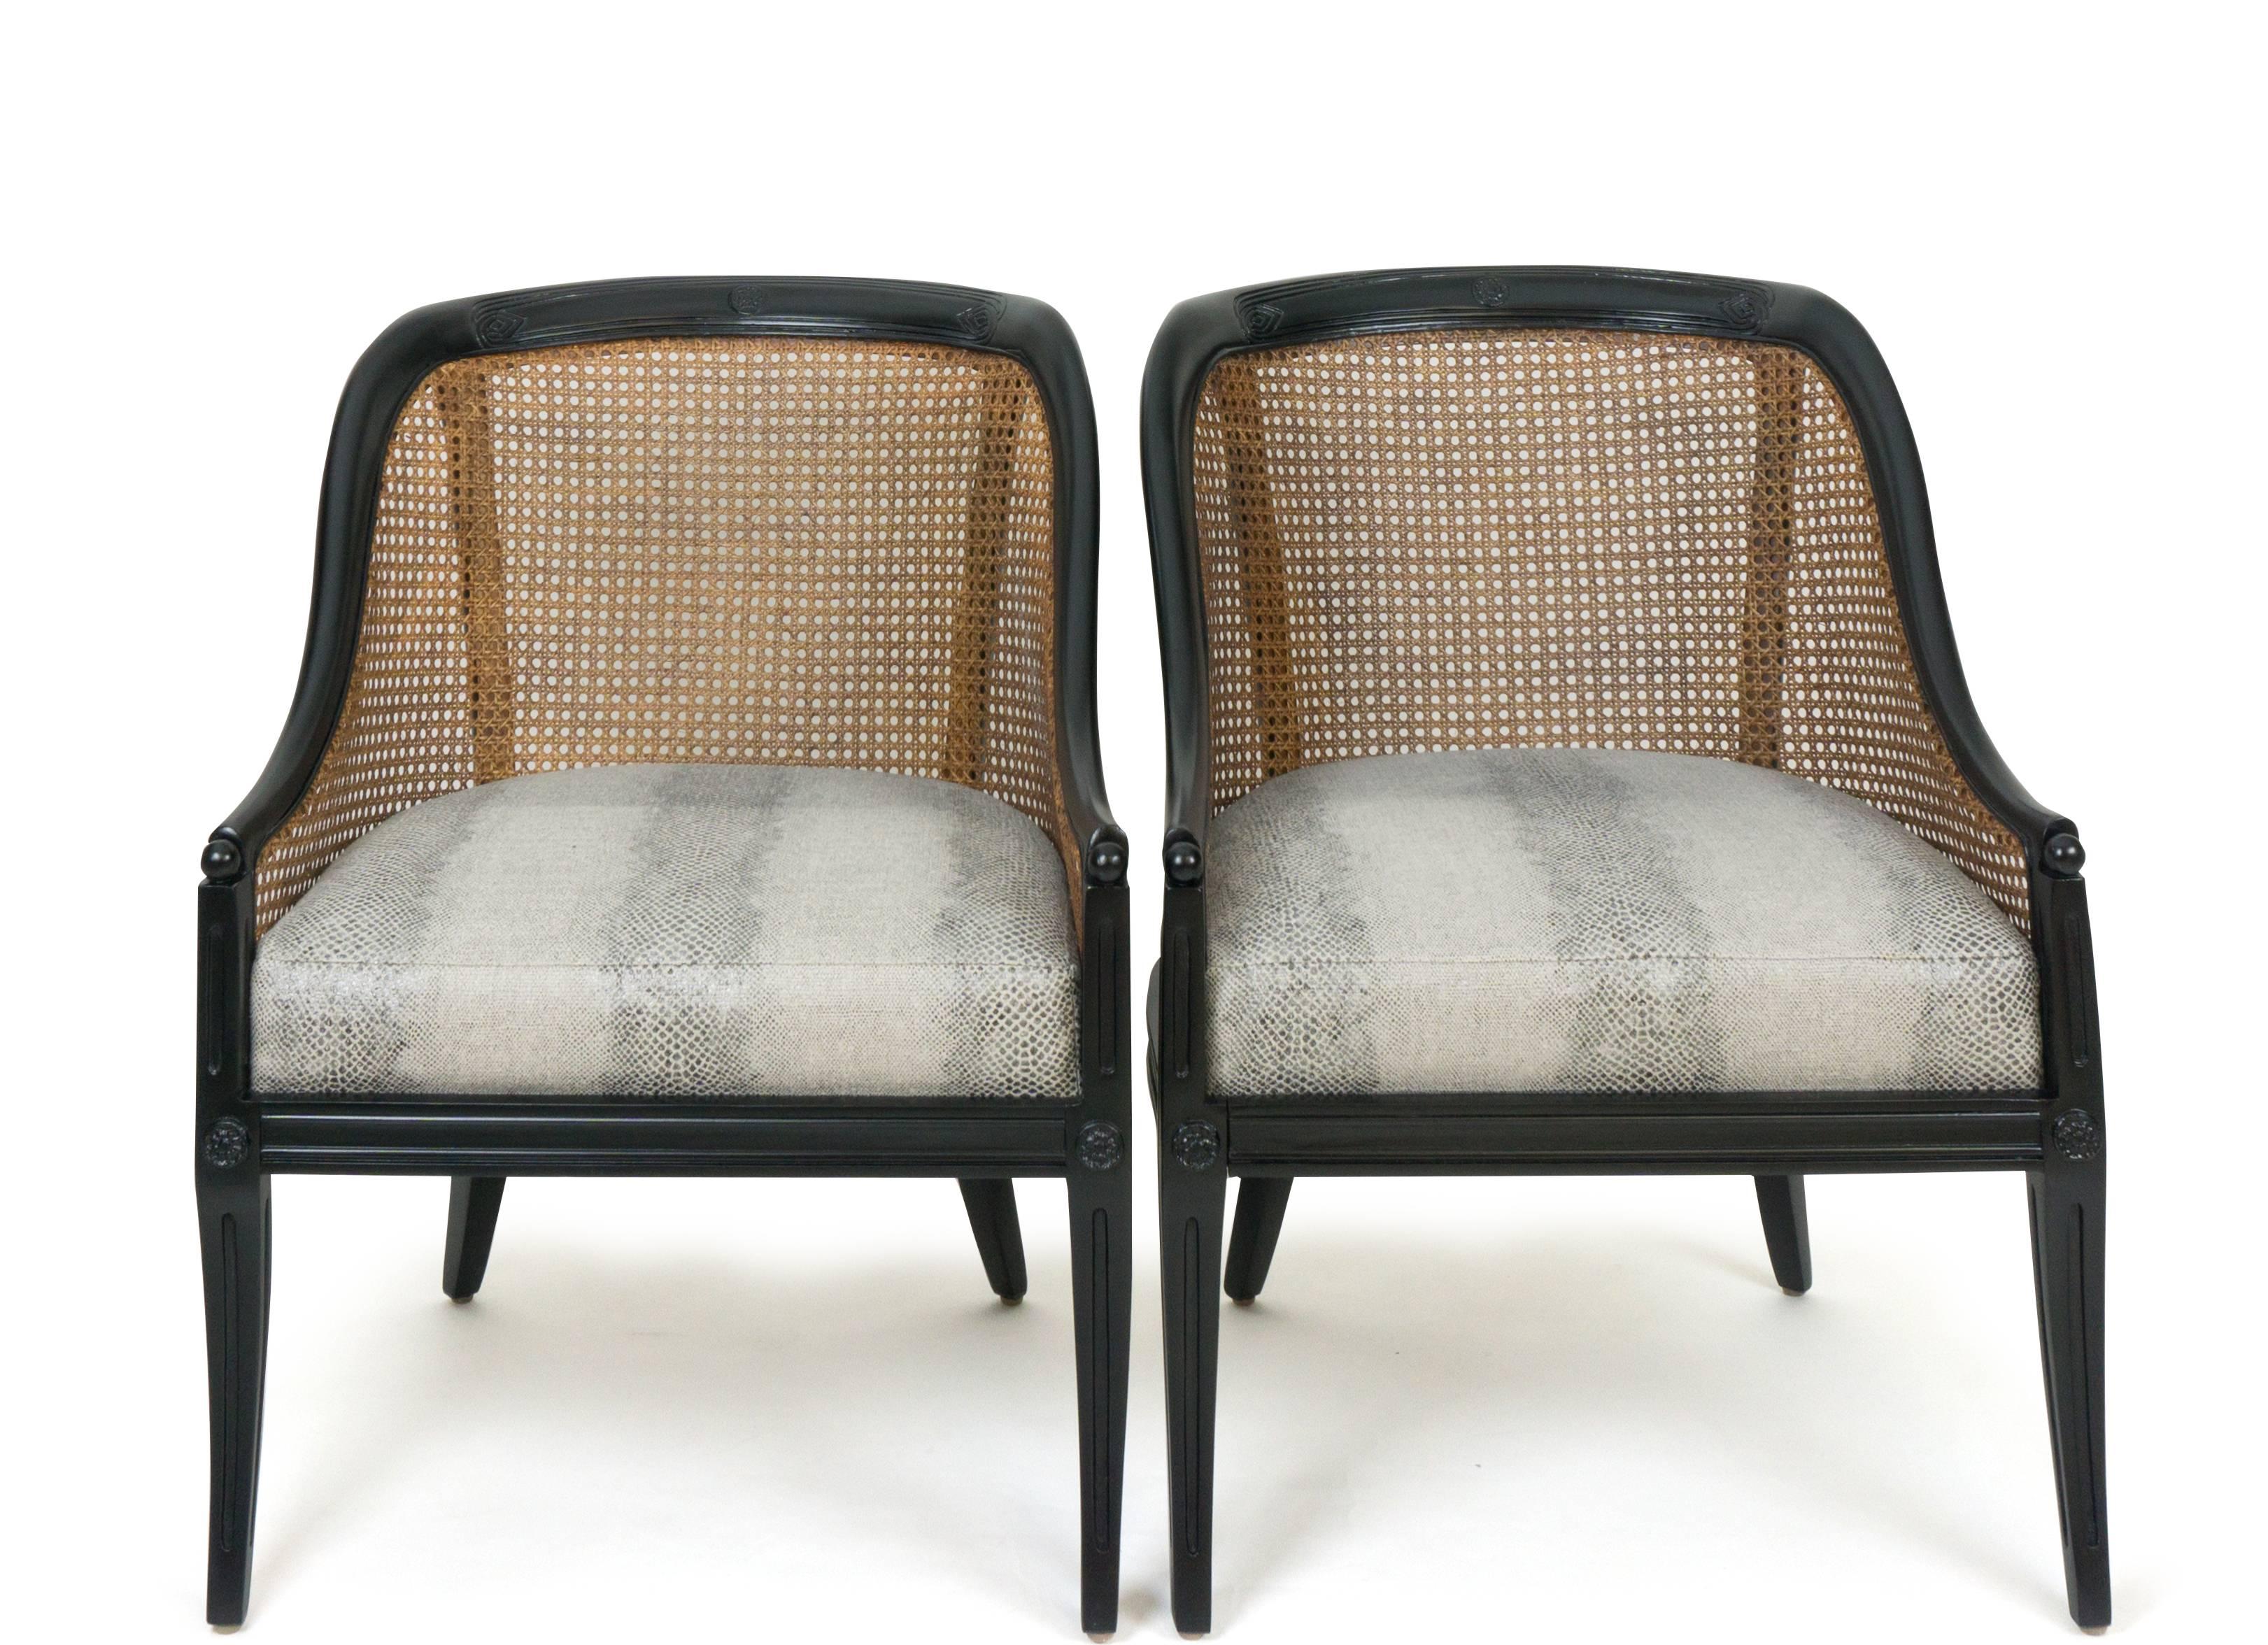 American Vintage Regency Caned Black Gondola Chairs with Faux Snakeskin